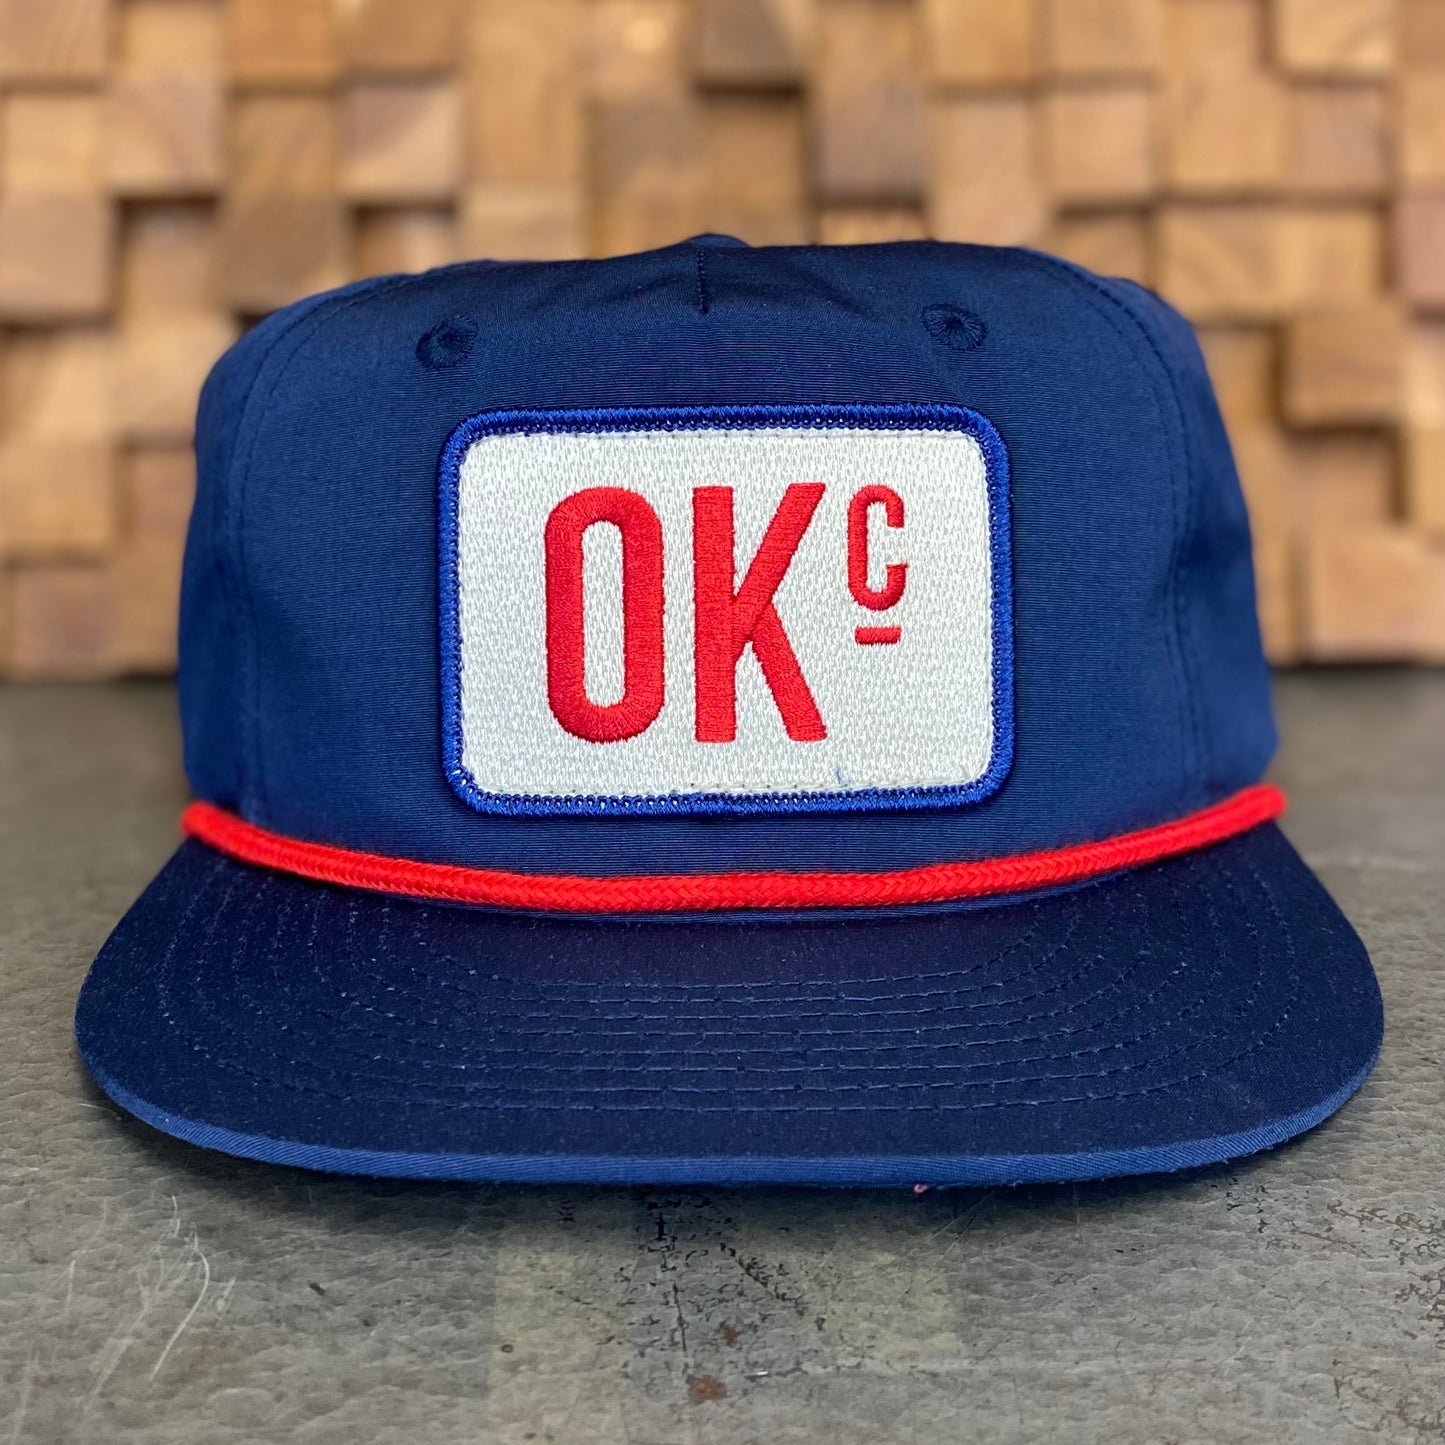 OKc Hat - Blue/Red Rope hat